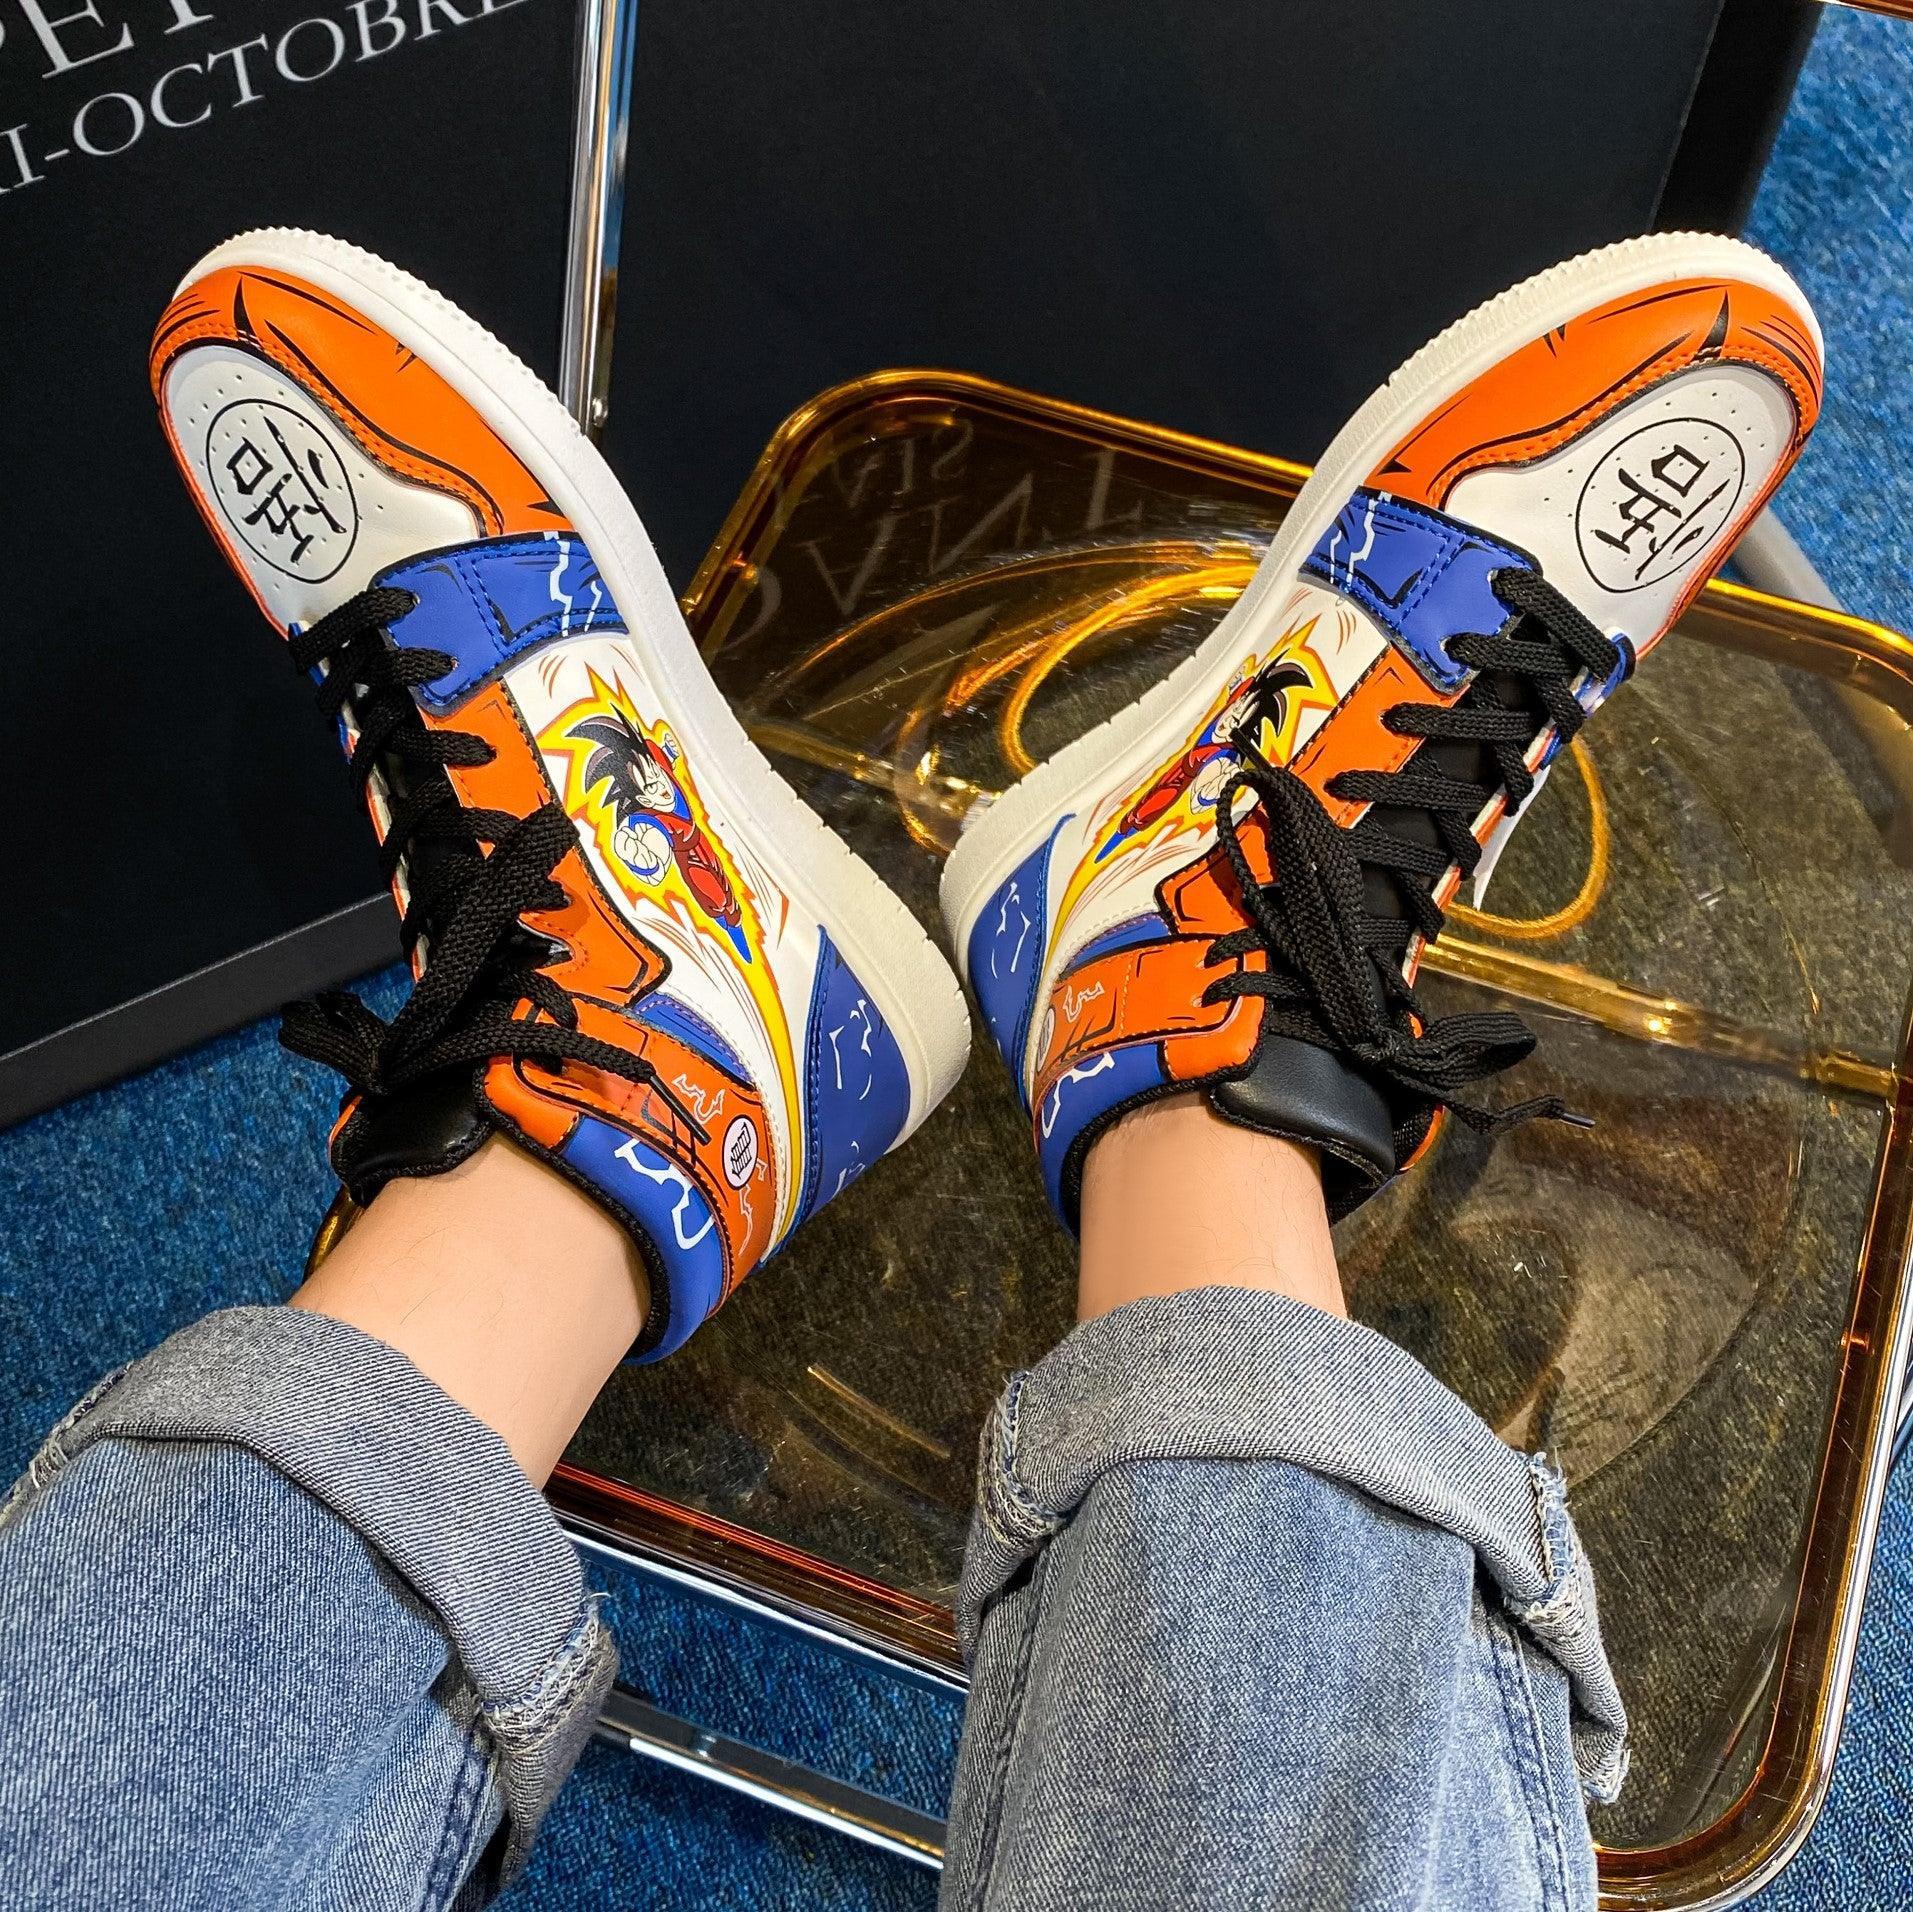 (Out of Stock) Dragon Ball Goku Orange High Top Shoes / Sneakers - AnimeGo Store